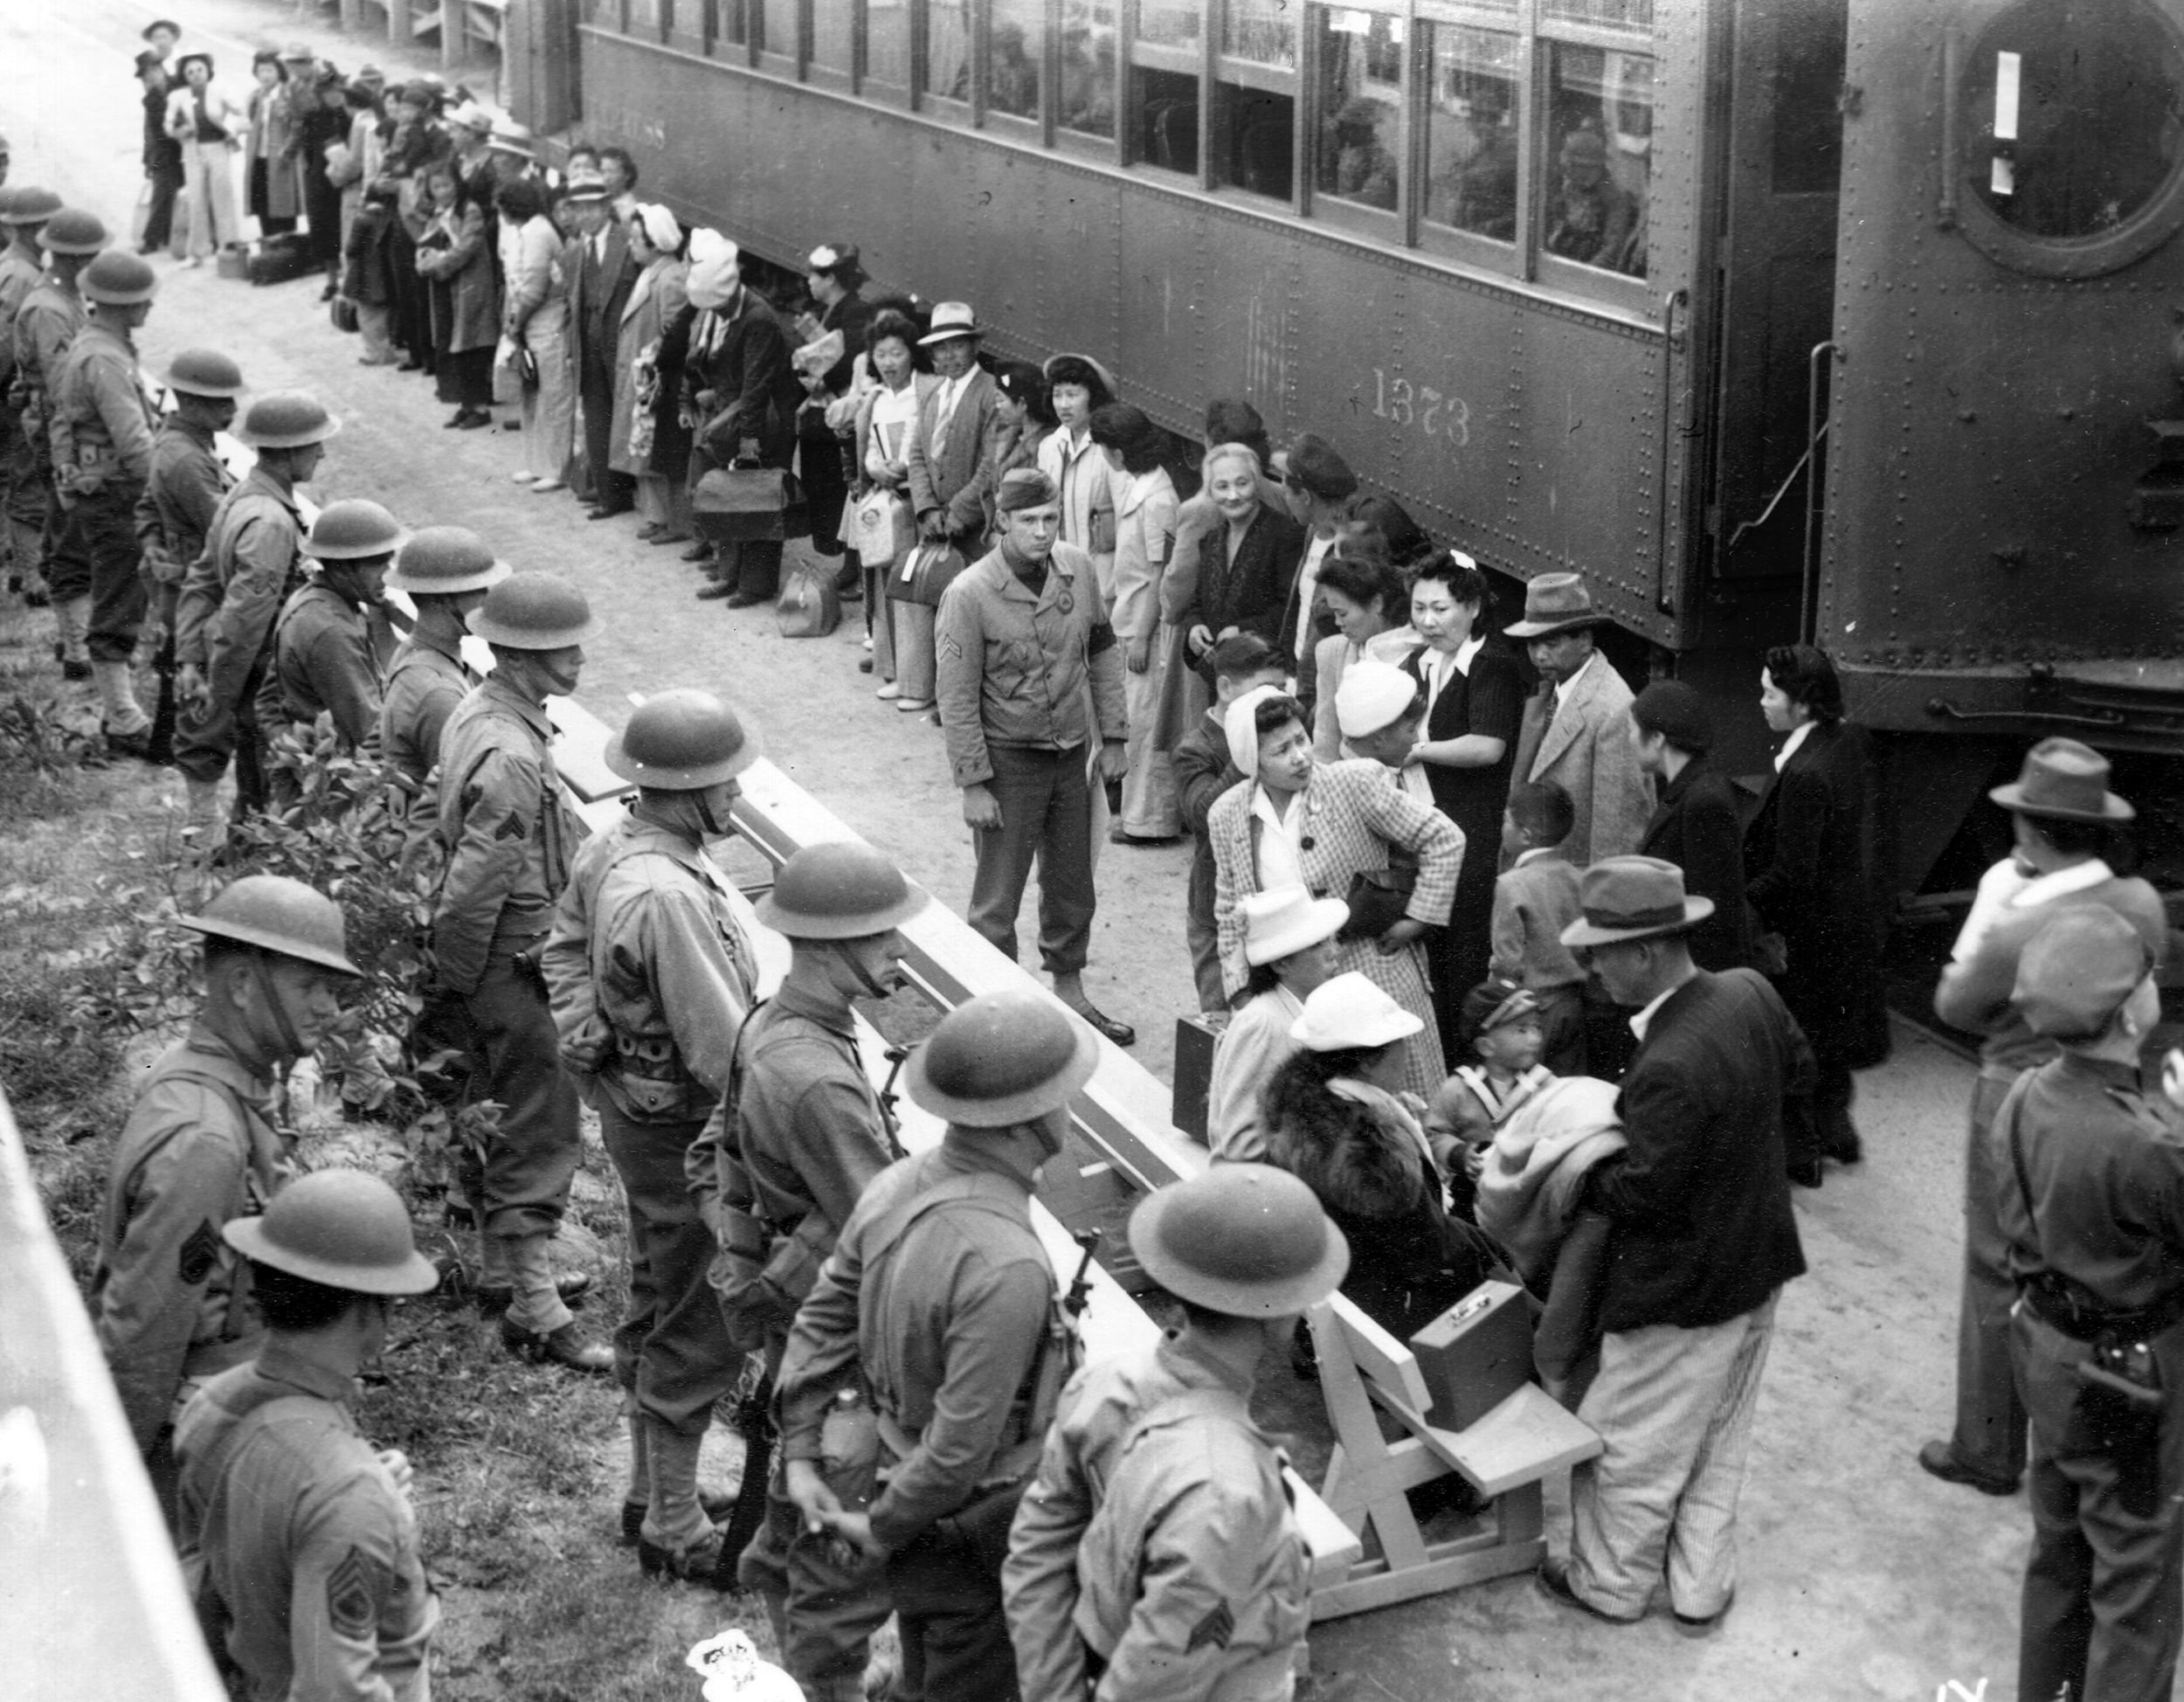 Japanese-Americans await orders to board a train to a resettlement camp during the early days of U.S. involvement in World War II.